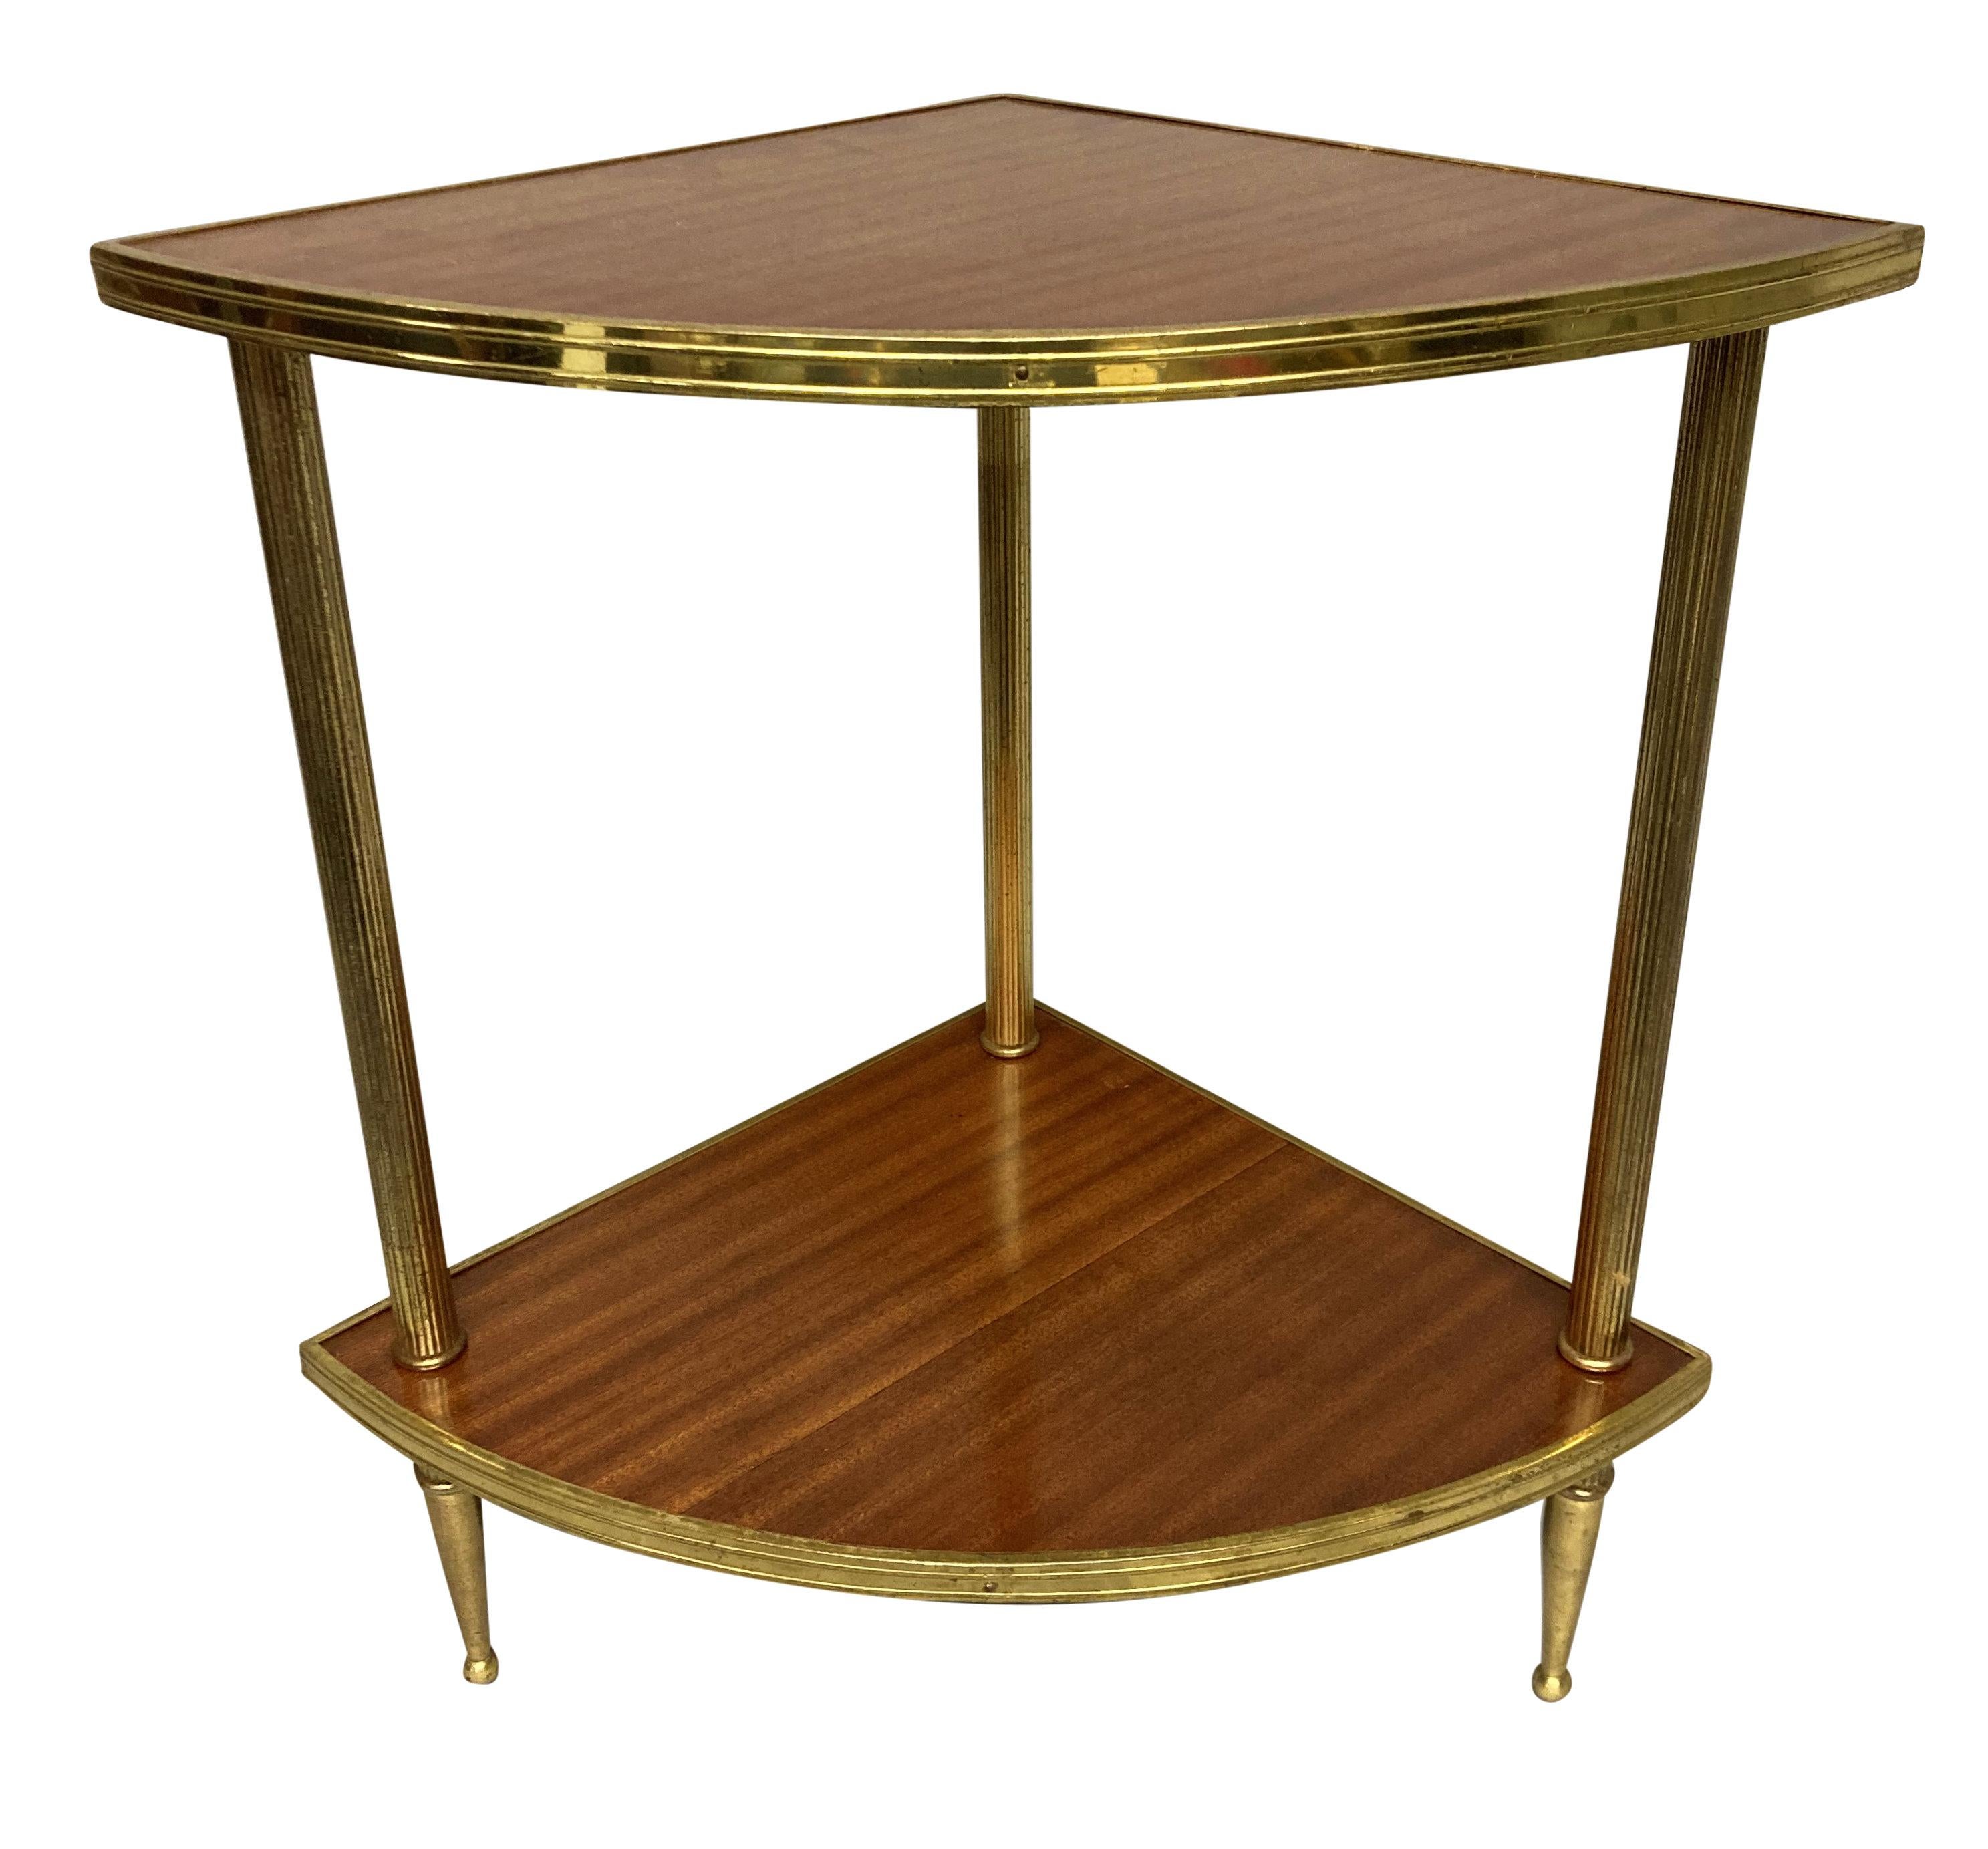 A pair of French Mid-Century etagere side tables with two tiers, in lacquered brass with polished sapele wood tops. Can be used in various configurations.